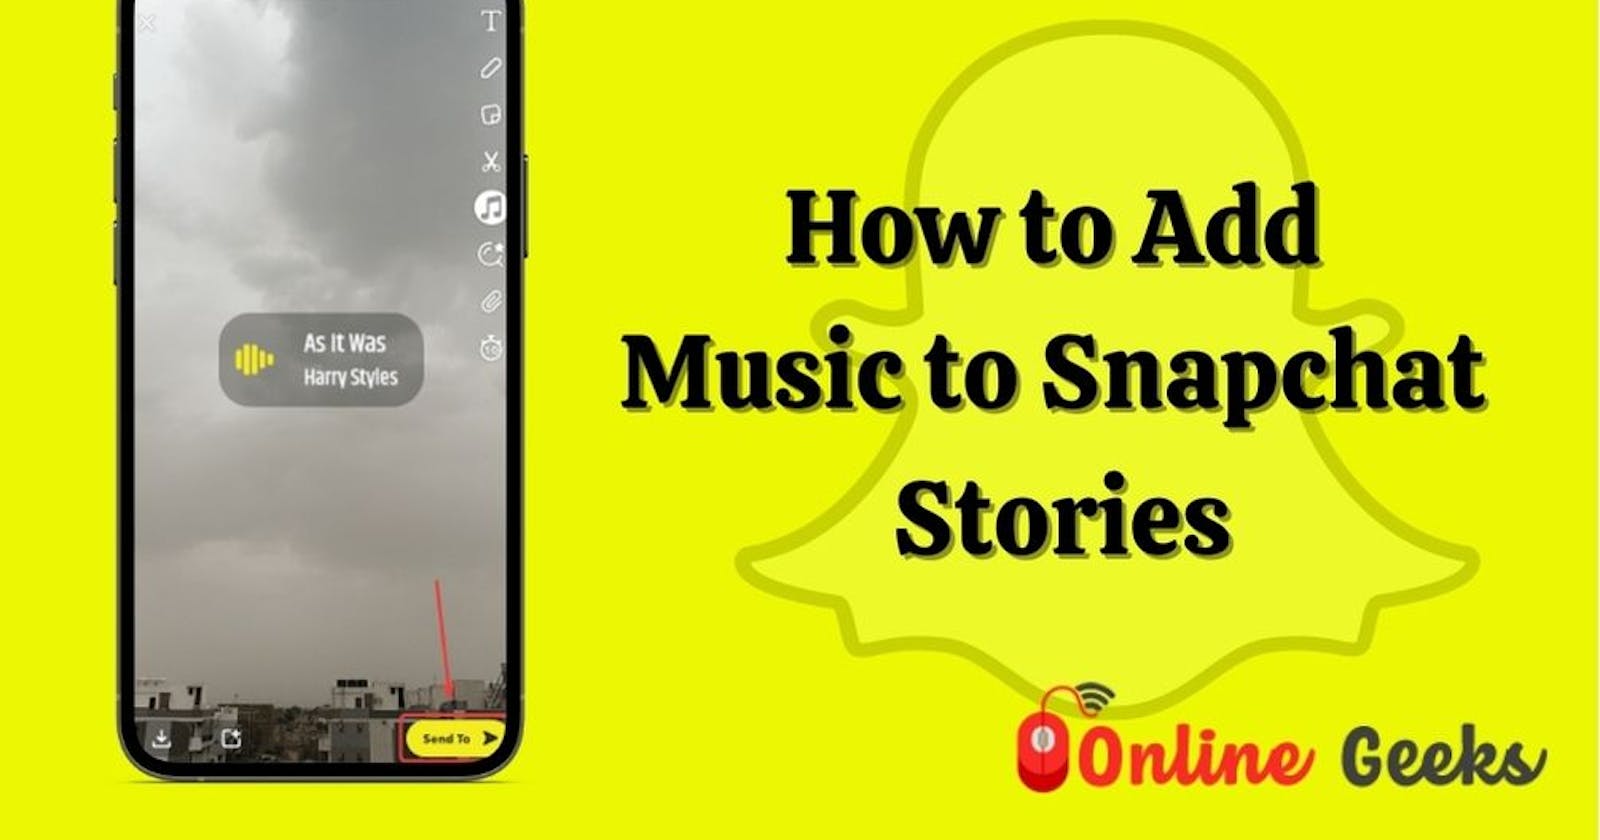 How to Add Music to Snapchat Stories?